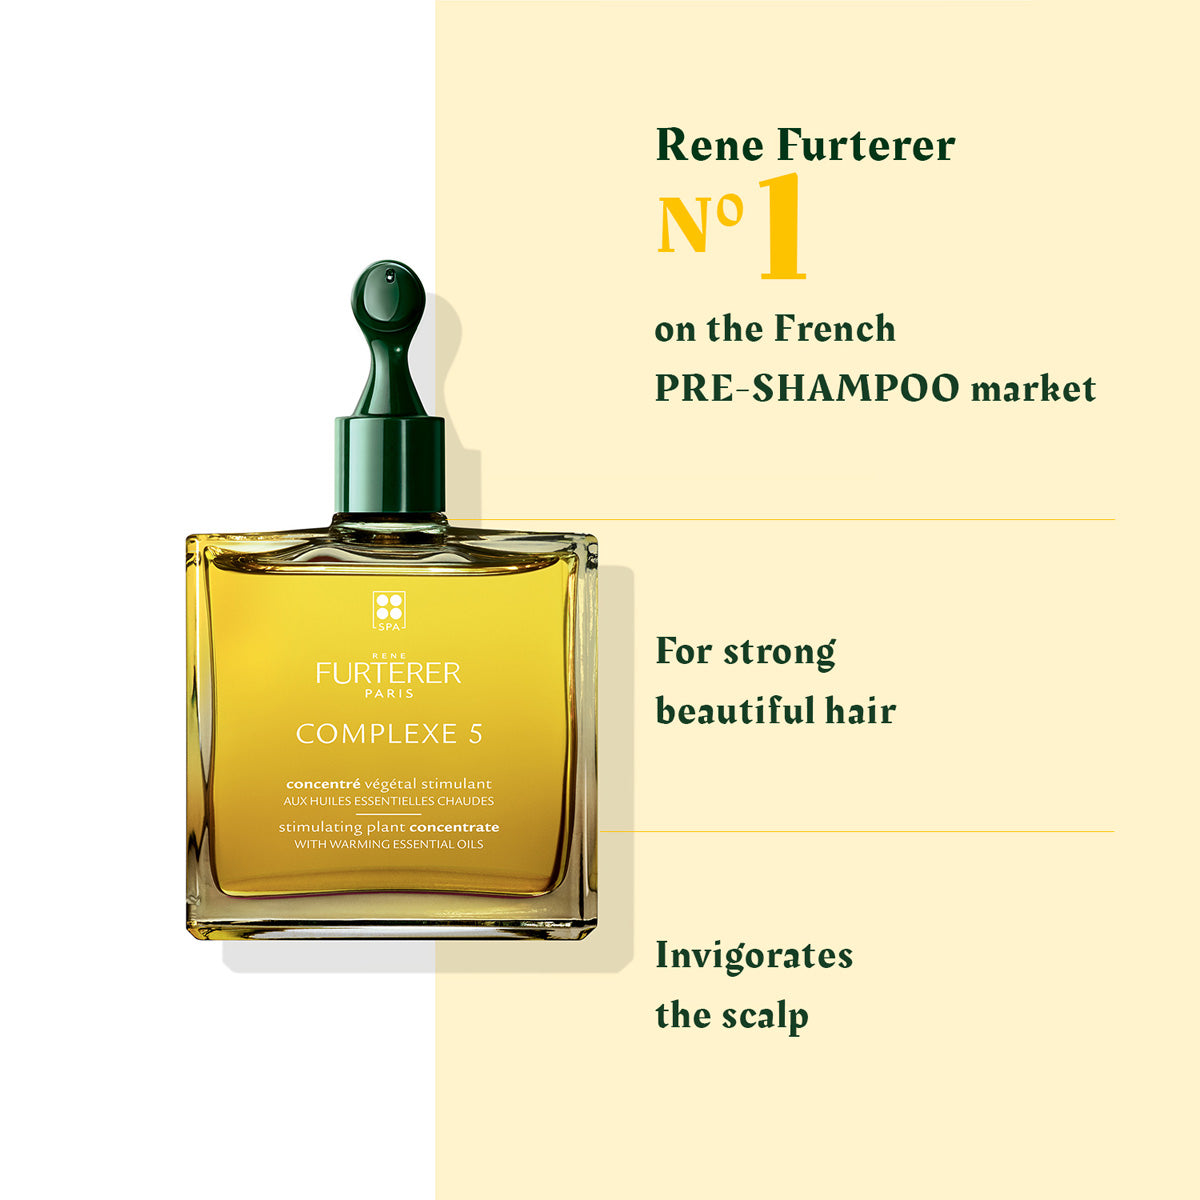 Rene Furtere|Complexe 5 Stimulating Plant extract with essential oils 50ml